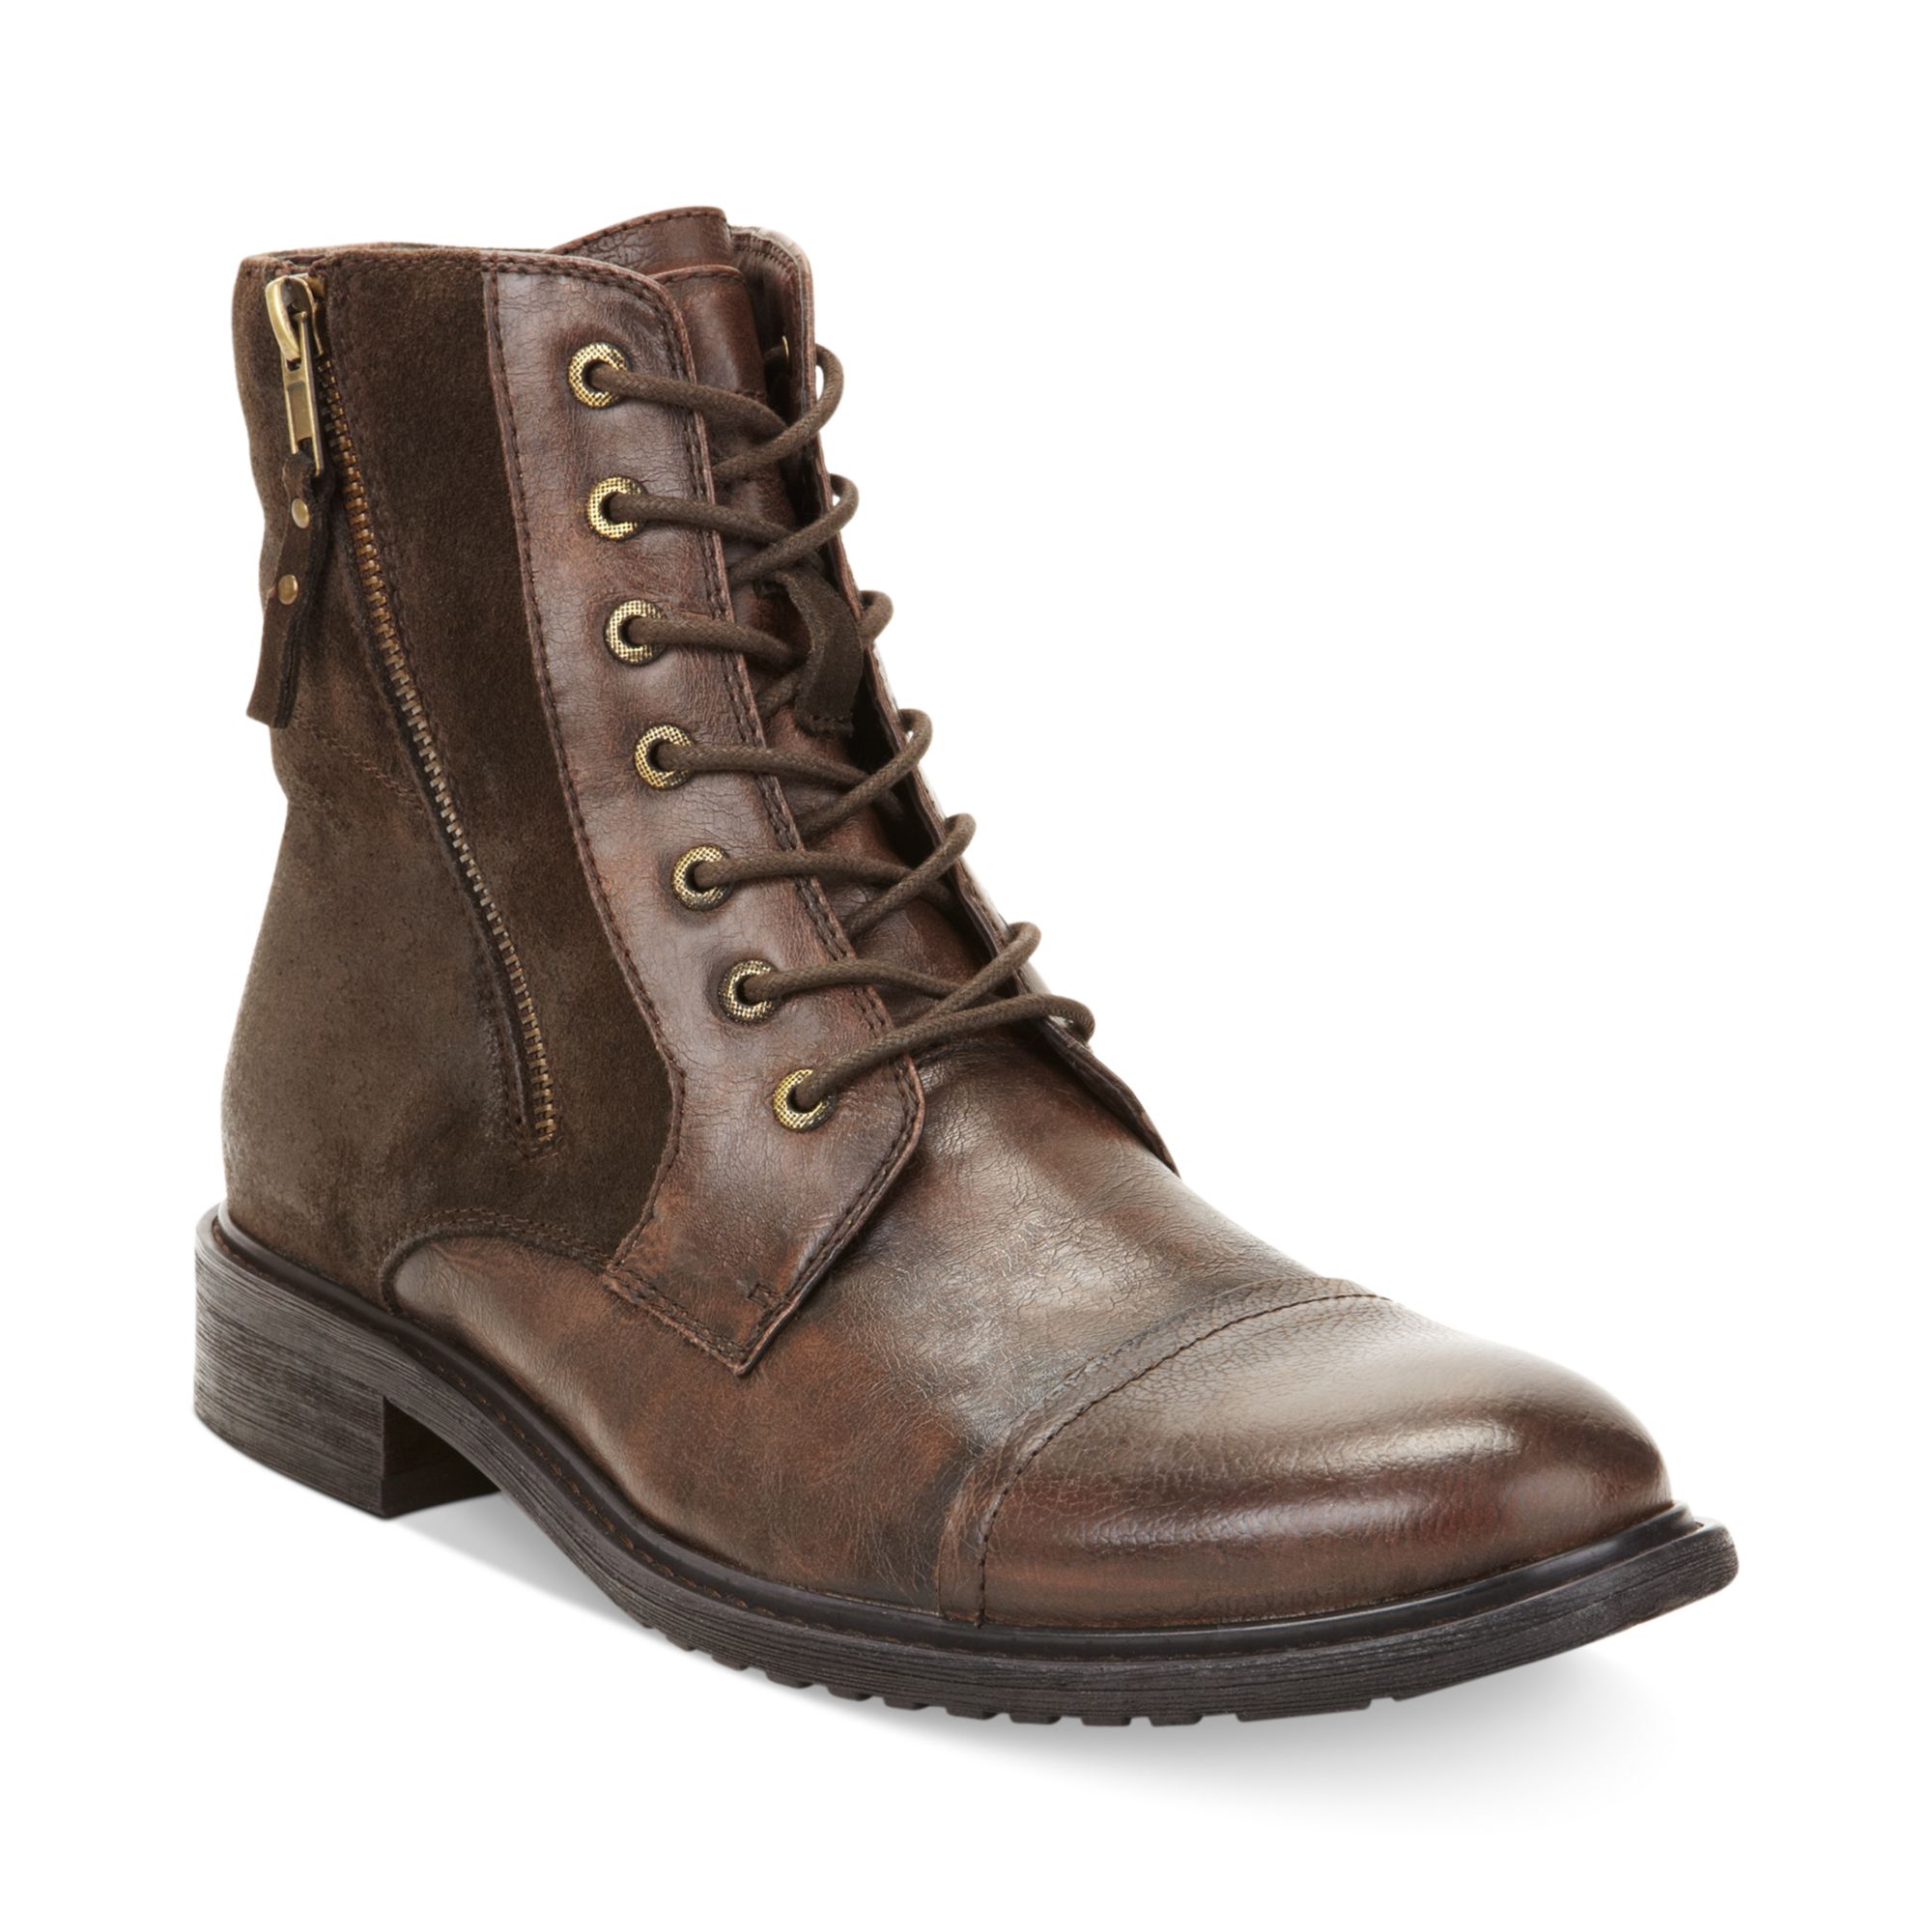 Kenneth Cole Reaction Hit Men Captoe Boots in Brown for Men - Lyst